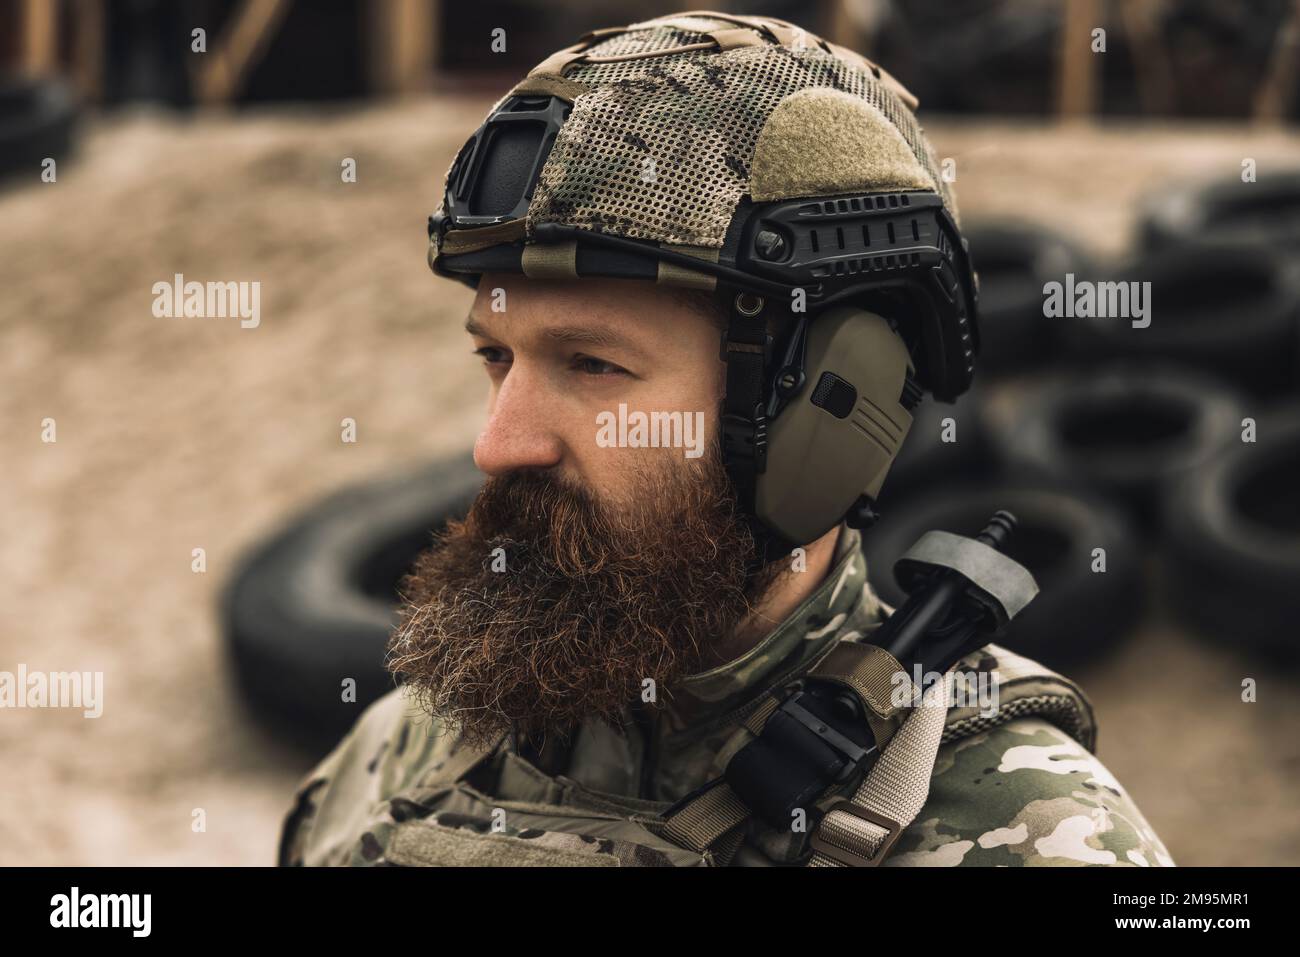 Bearded soldier in military uniform looking determined and serious Stock Photo